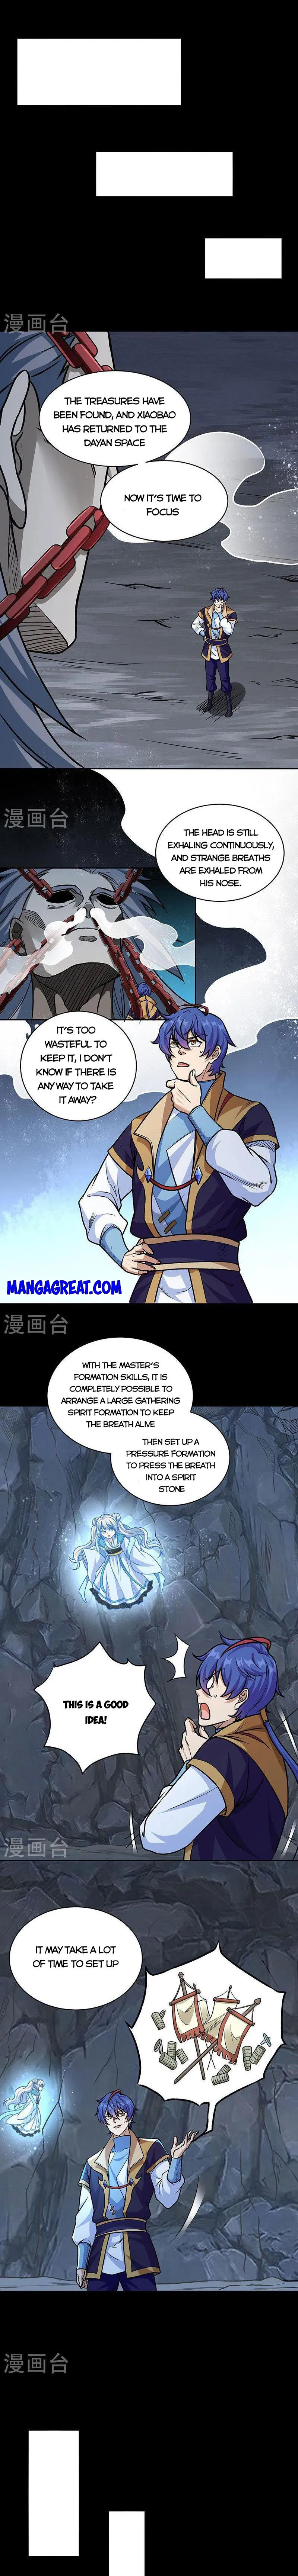 Martial Arts Reigns - Page 3